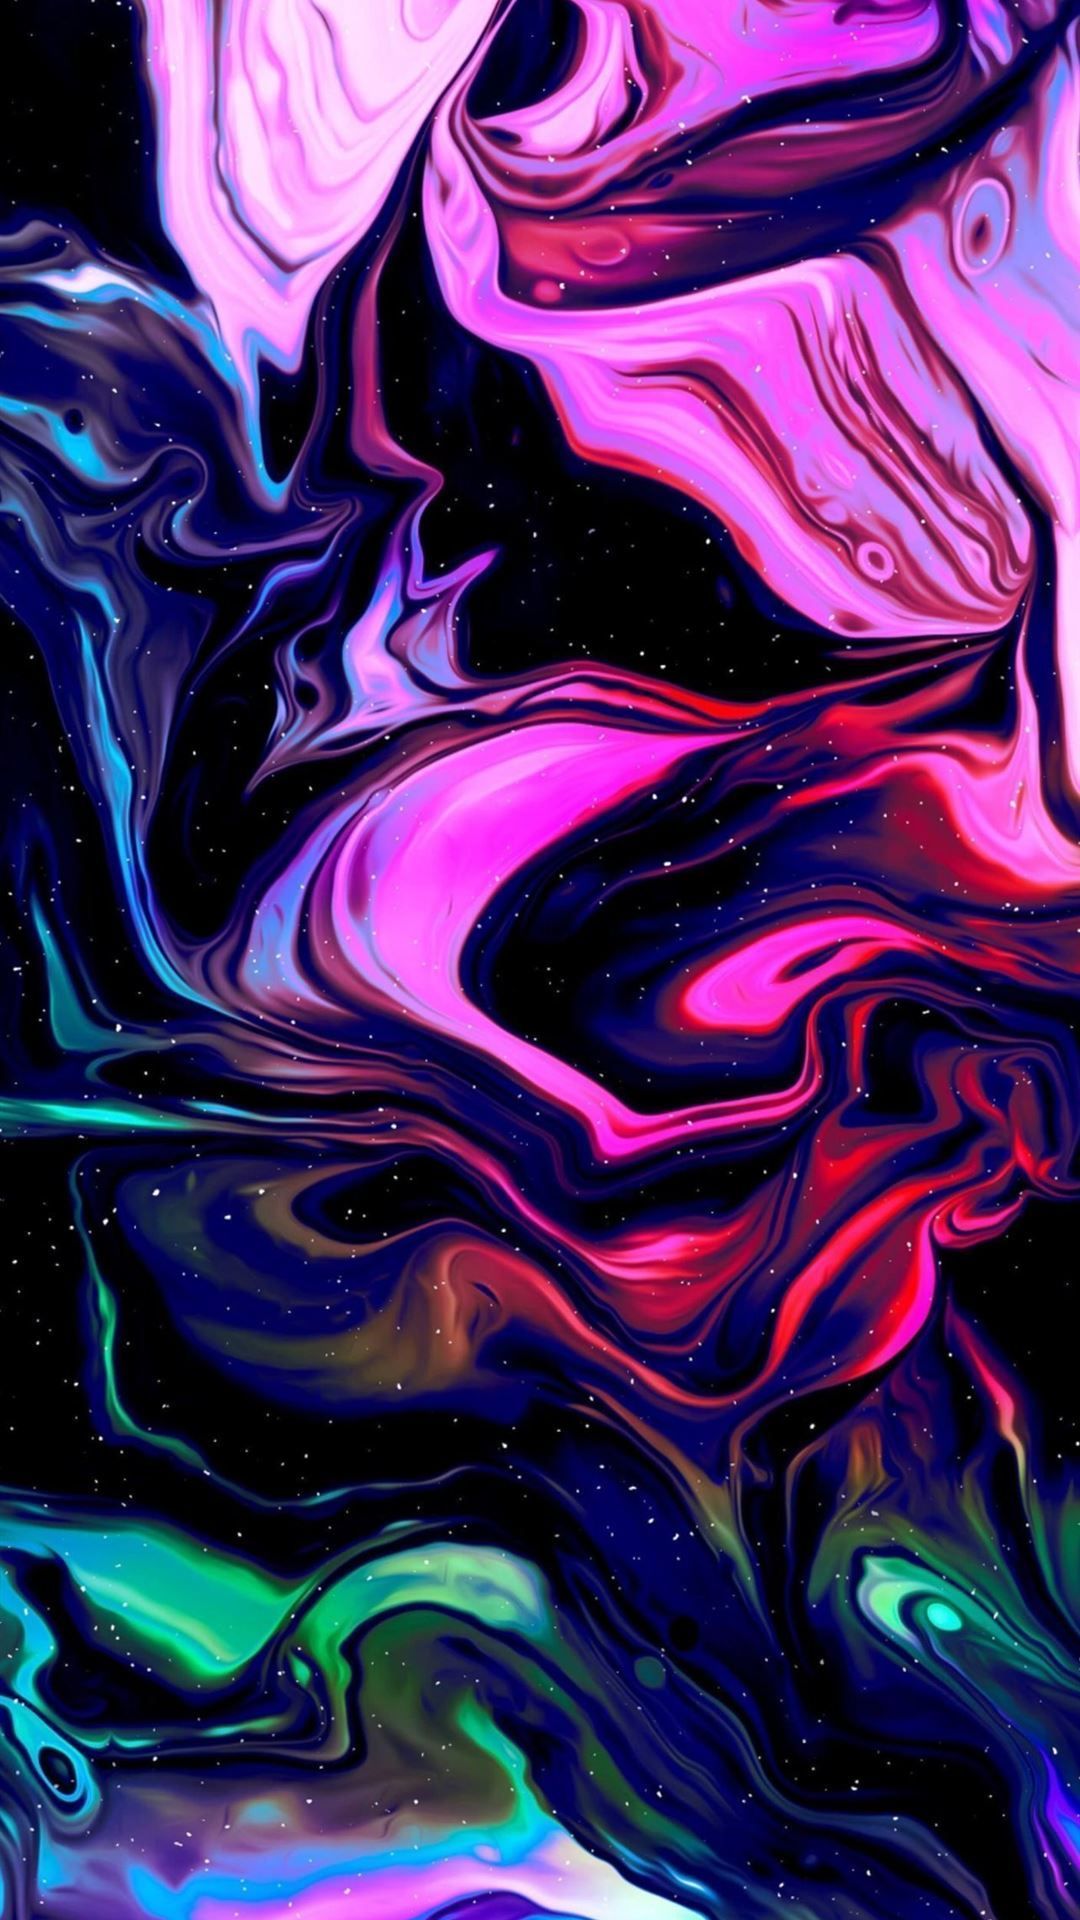 A colorful abstract artwork with black and white background - Trippy, psychedelic